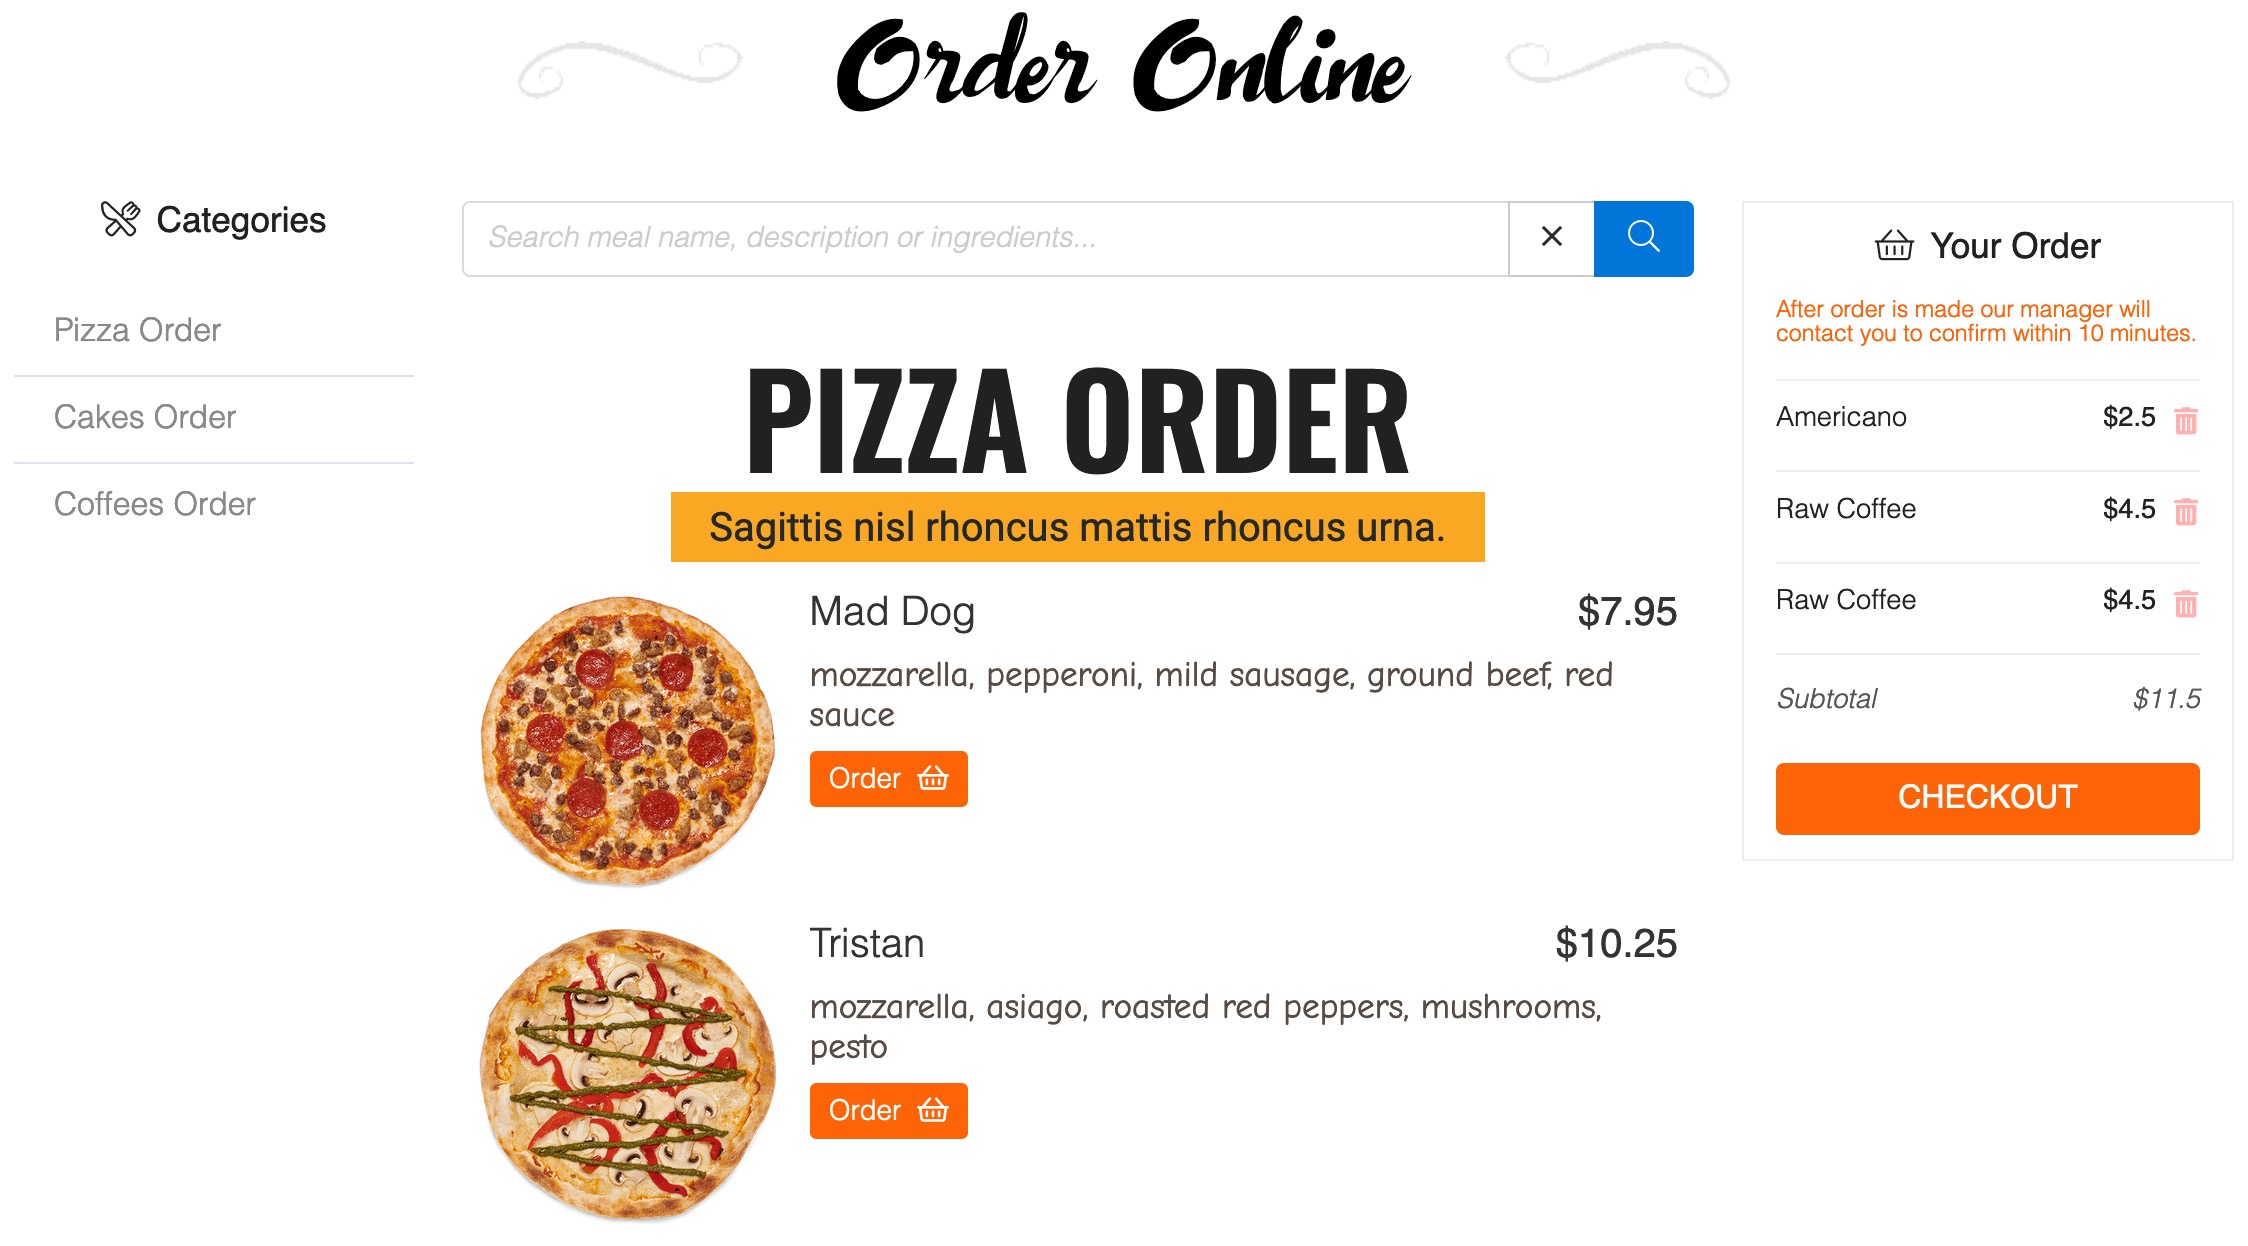 A cart system that adds <strong>Order button</strong> to meals menu. <code>FWFM Order Online</code> add-on enables <code>Order</code> section in Admin allowing to view <code>Orders history</code>. Also it adds <code>Order Online layout</code> that was designed specifically for online food order and has a <strong>search bar</strong> for meals on top, <strong>categories directory</strong> on the left and <strong>order total</strong> on the right. At a checkout a customer may select <strong>delivery</strong> time and add <strong>comments</strong>, which will be added to an order and saved along with contact information and order details.